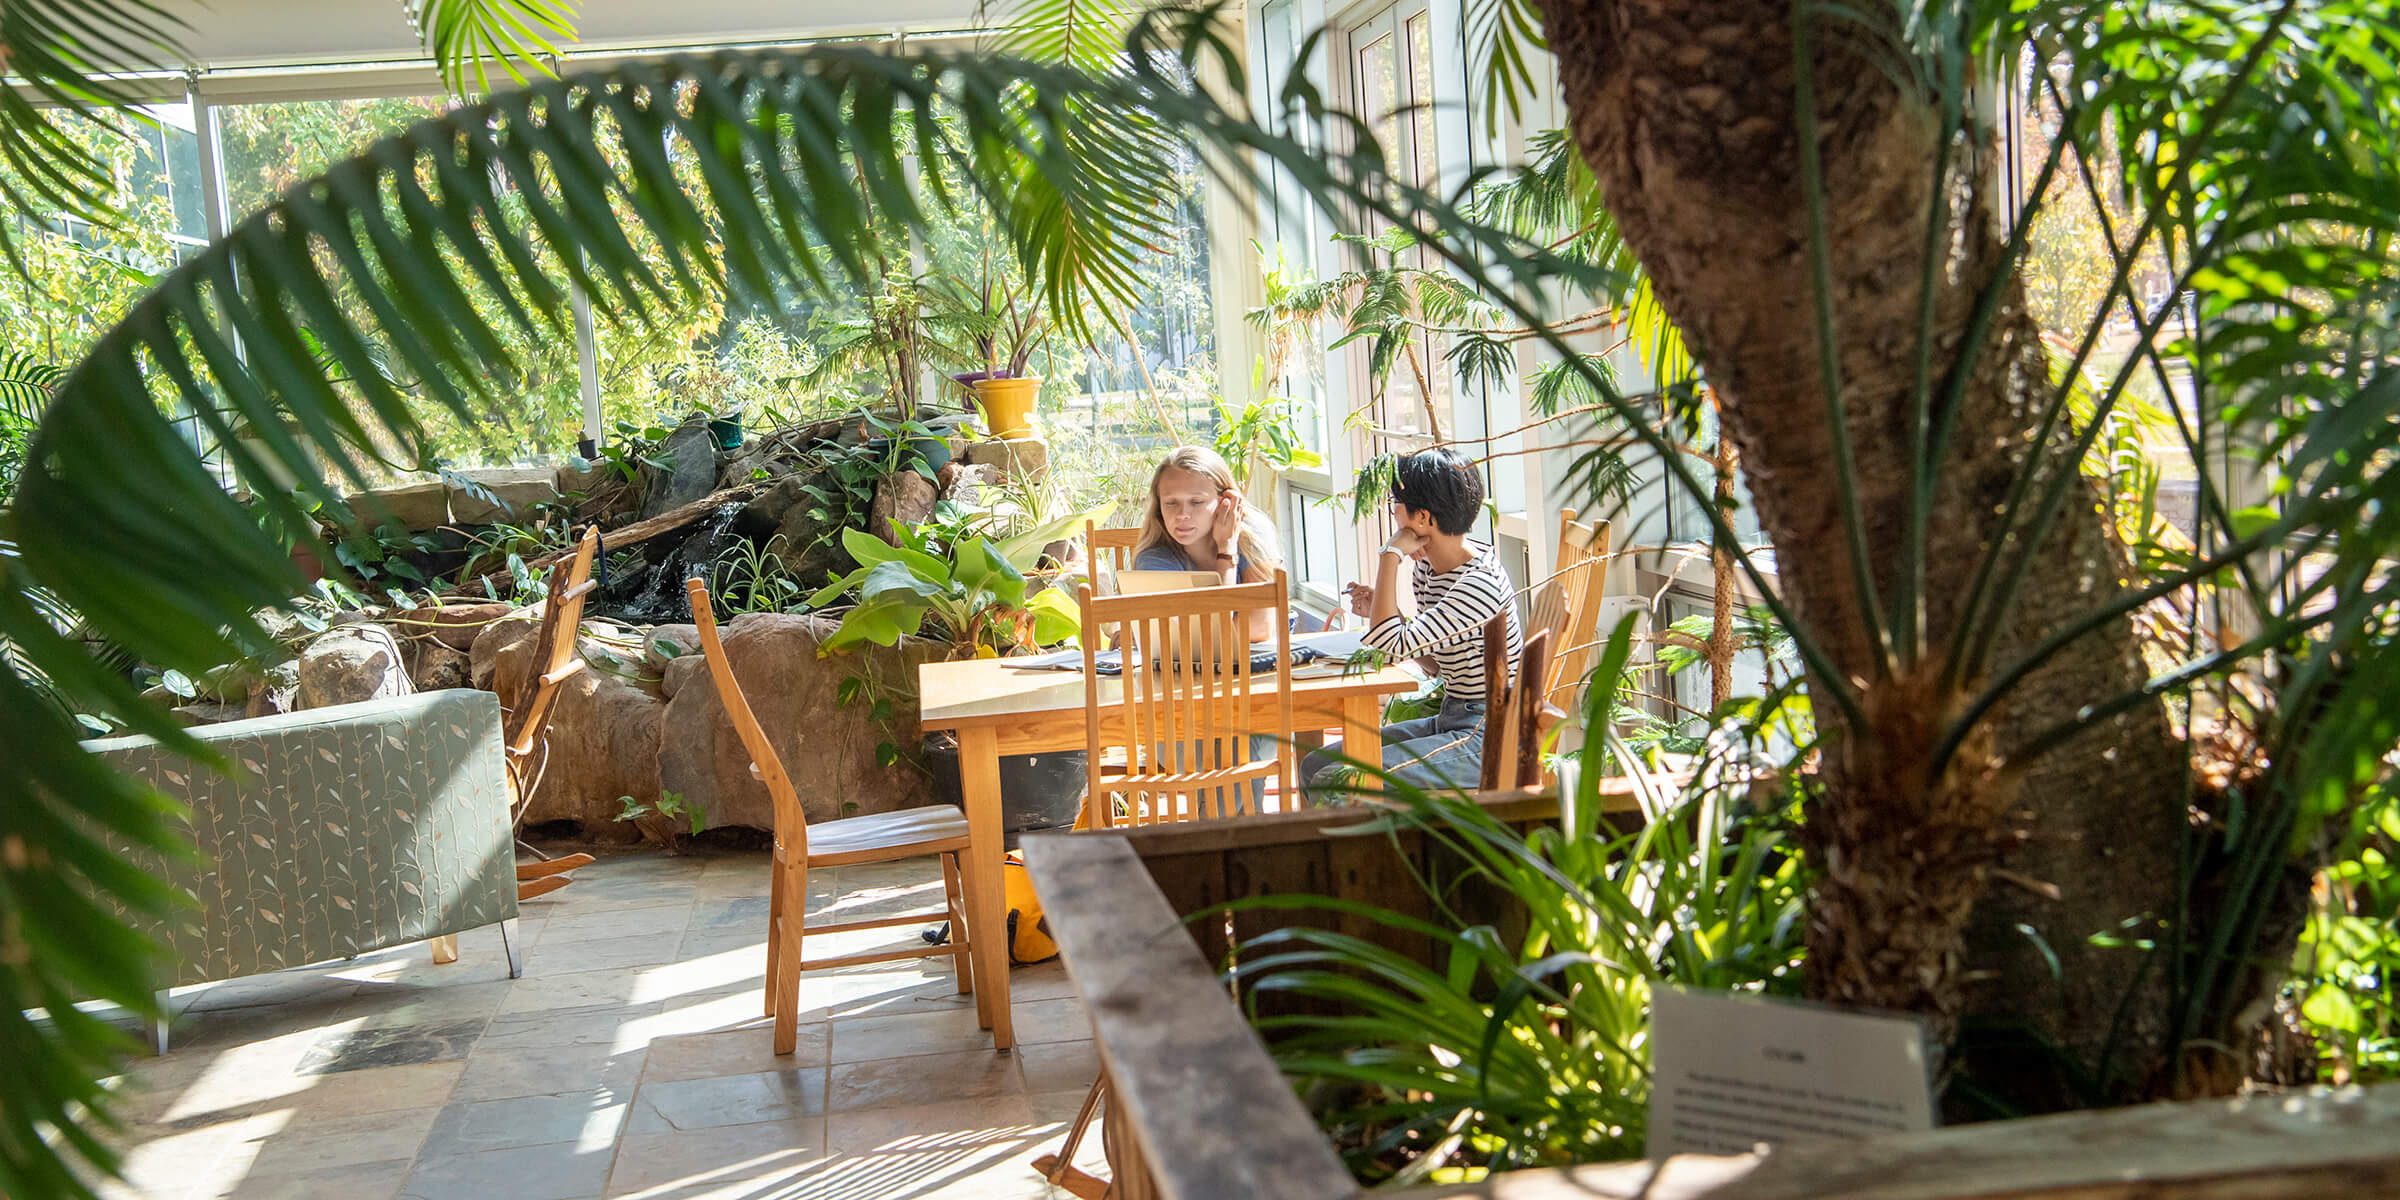 A student and professor meet in a sunny, plant-filled atrium.